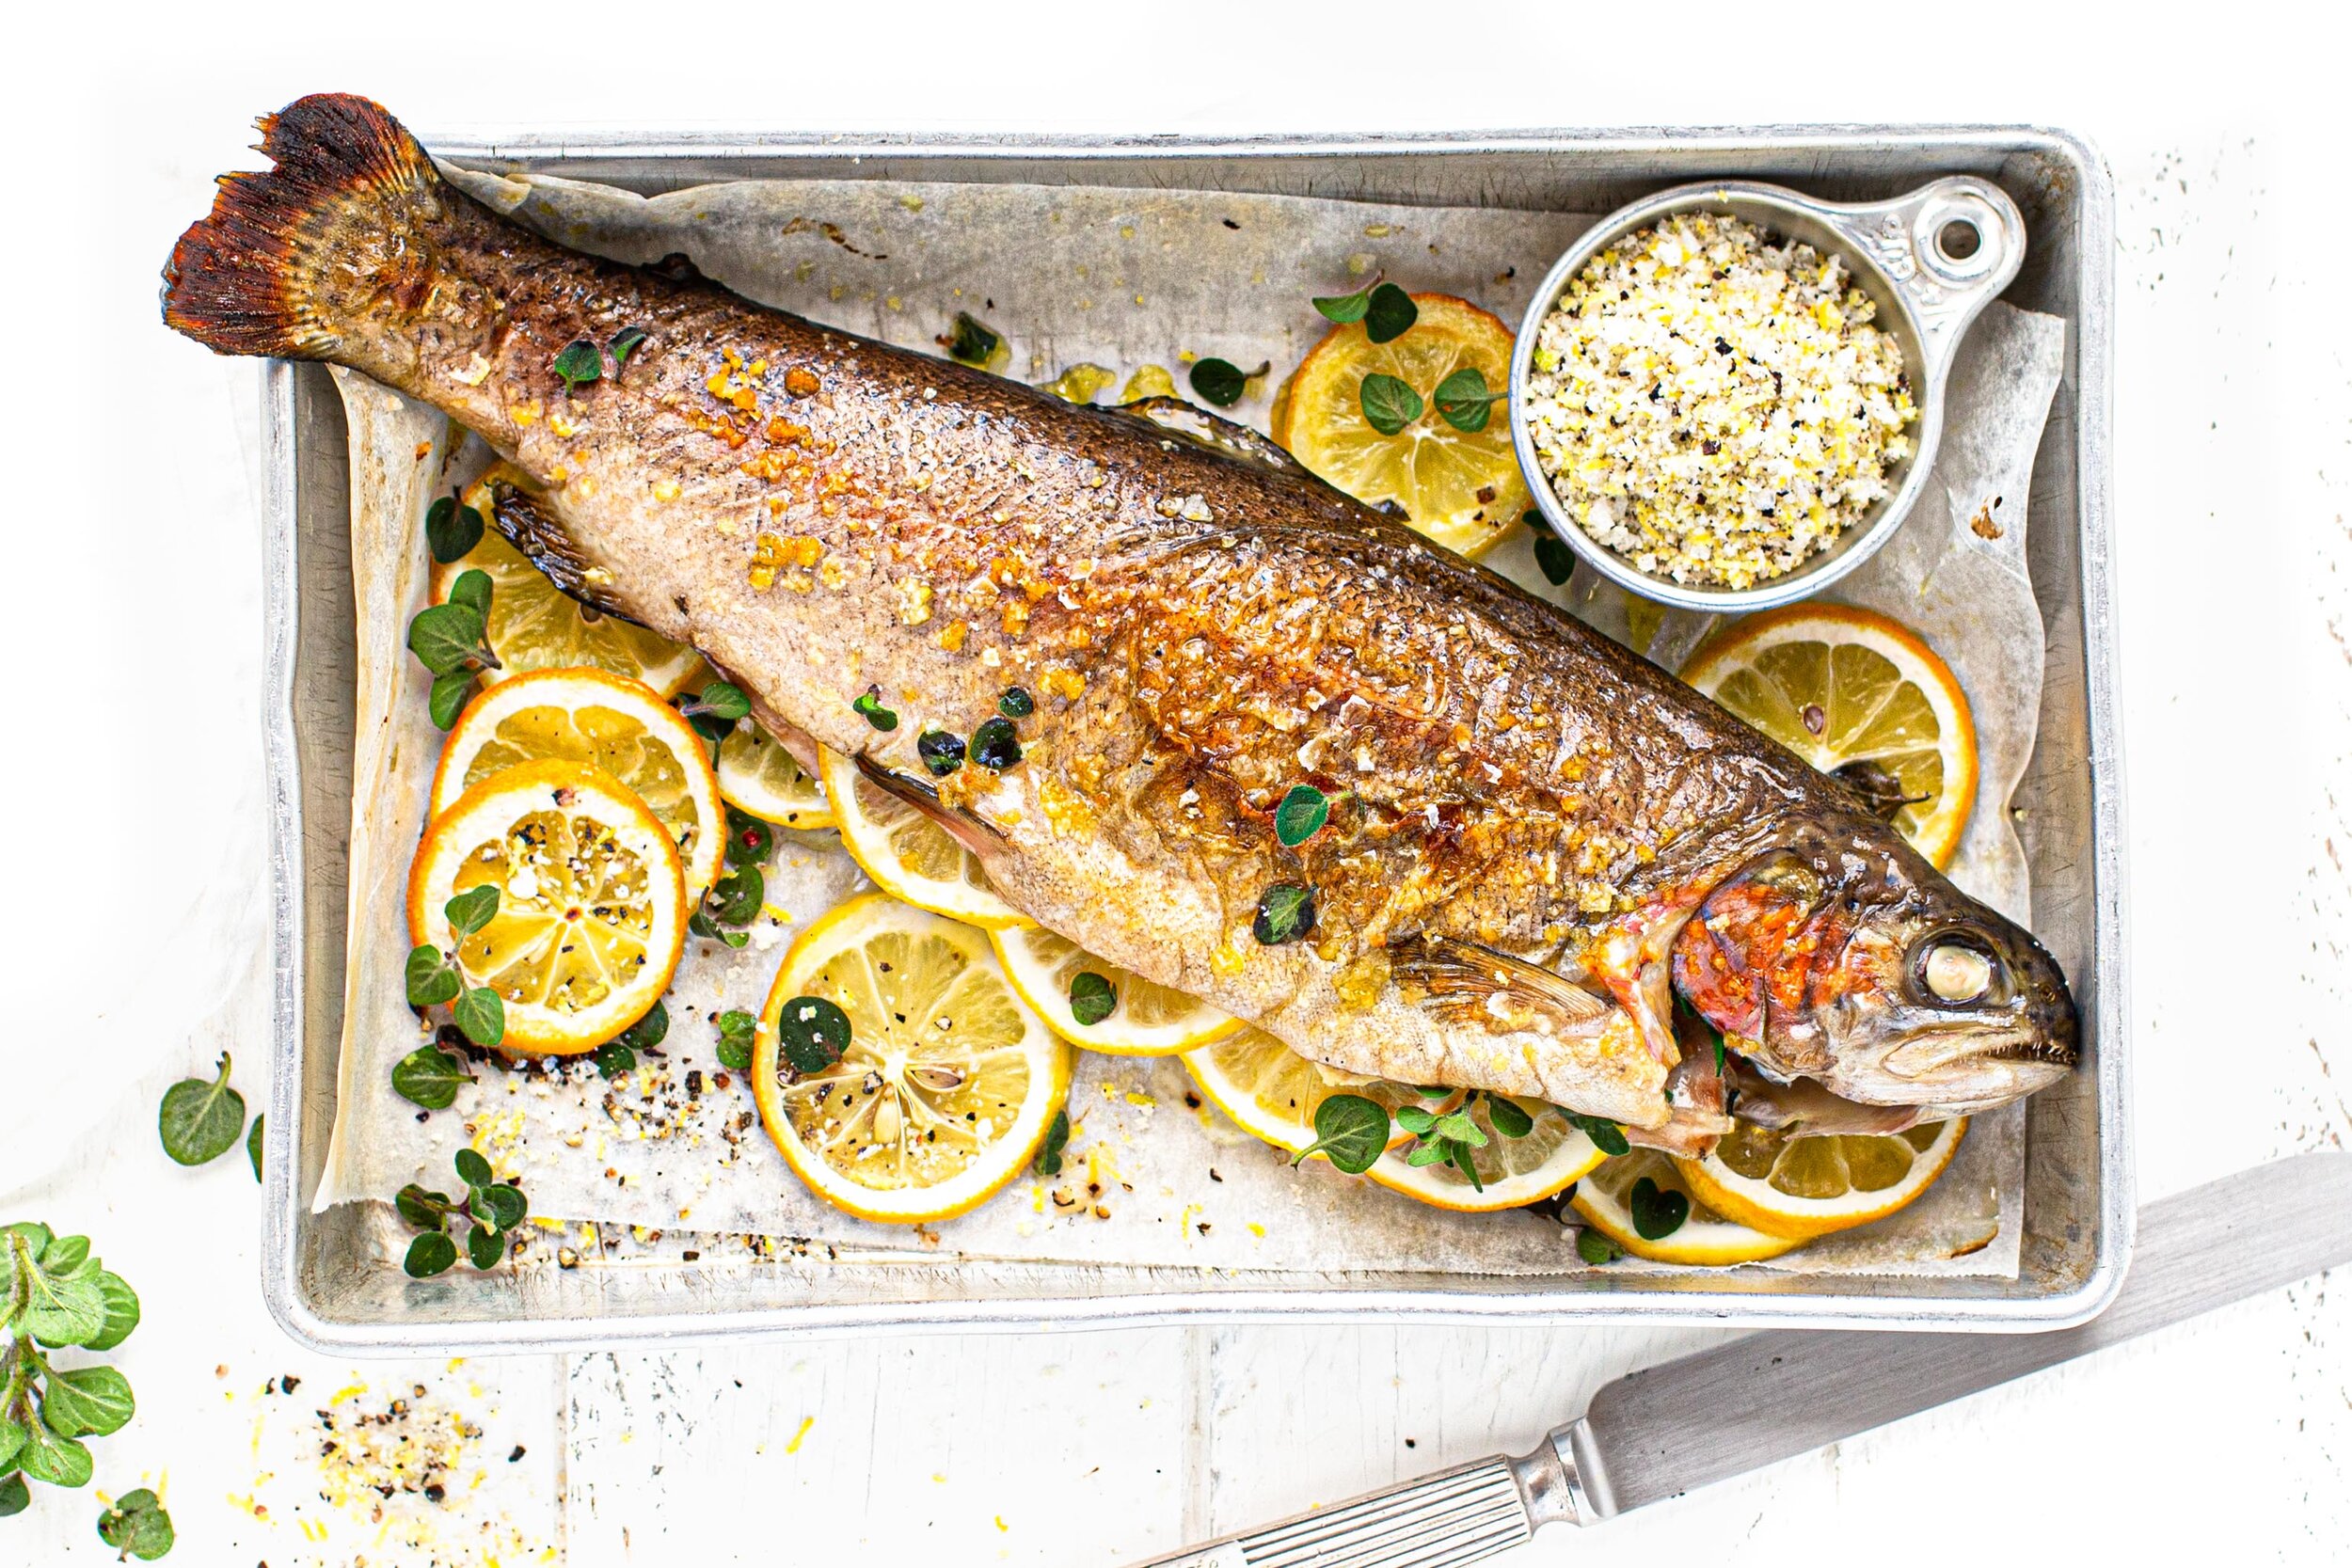 Whole Baked Rainbow Trout With Oregano